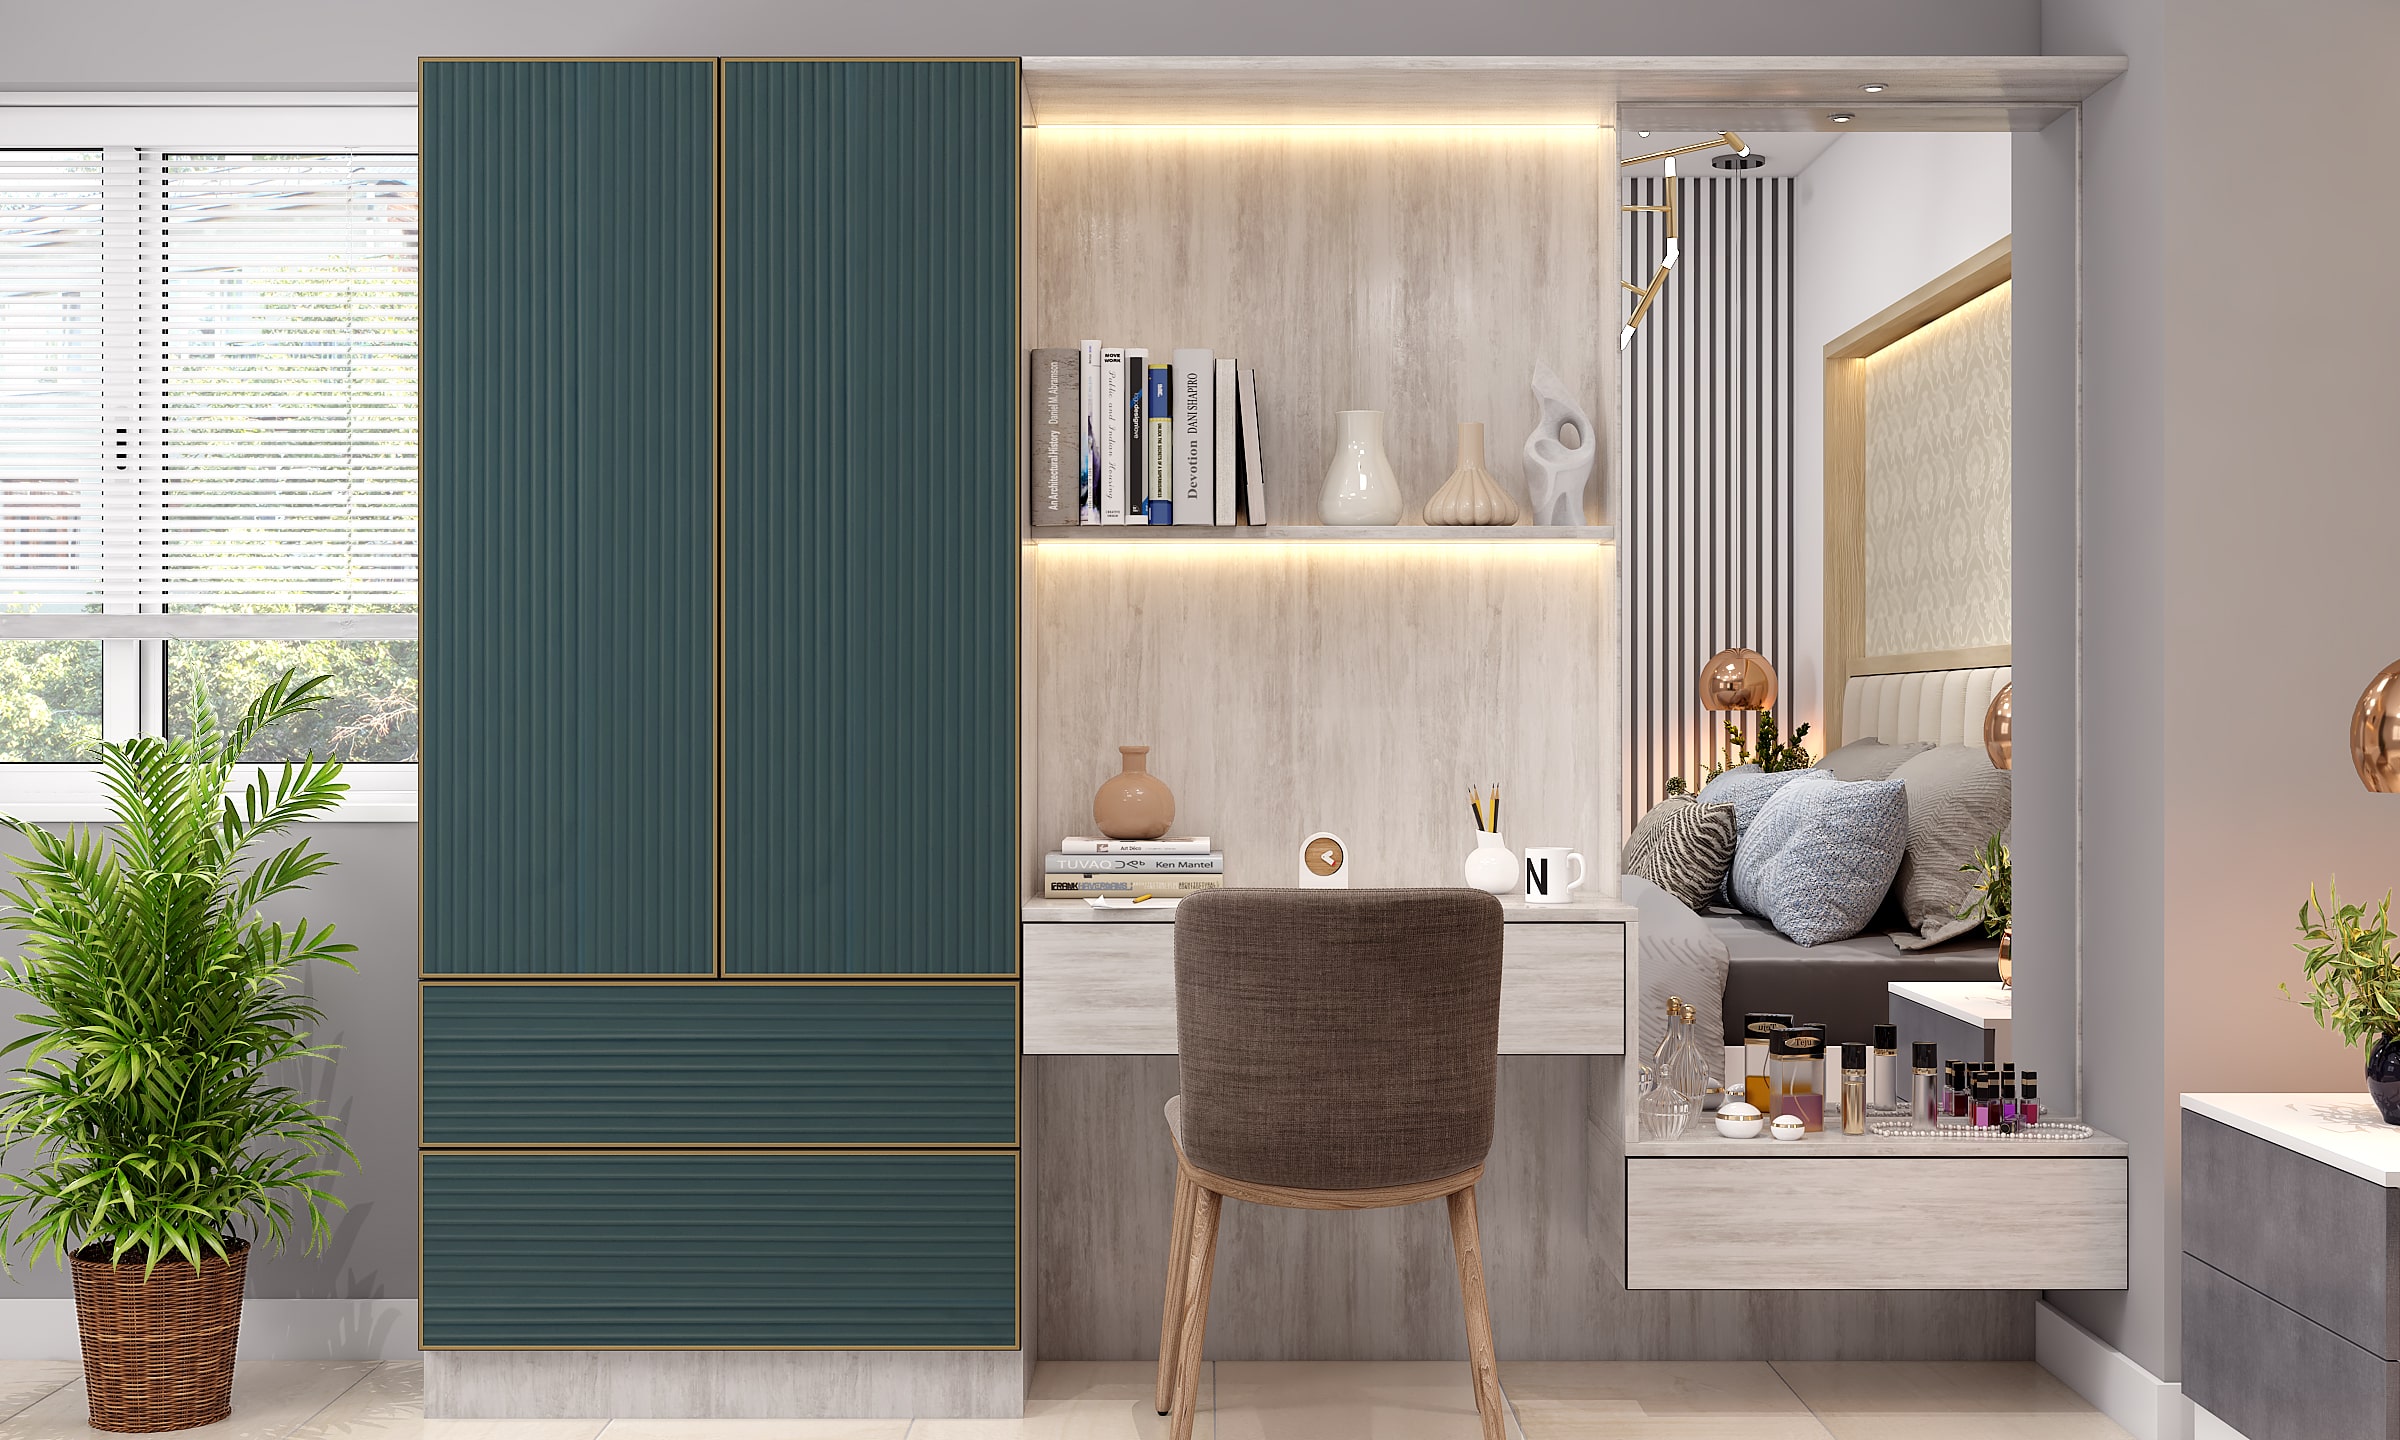 Luxury interior design with a two-door wardrobe featuring premium finishes